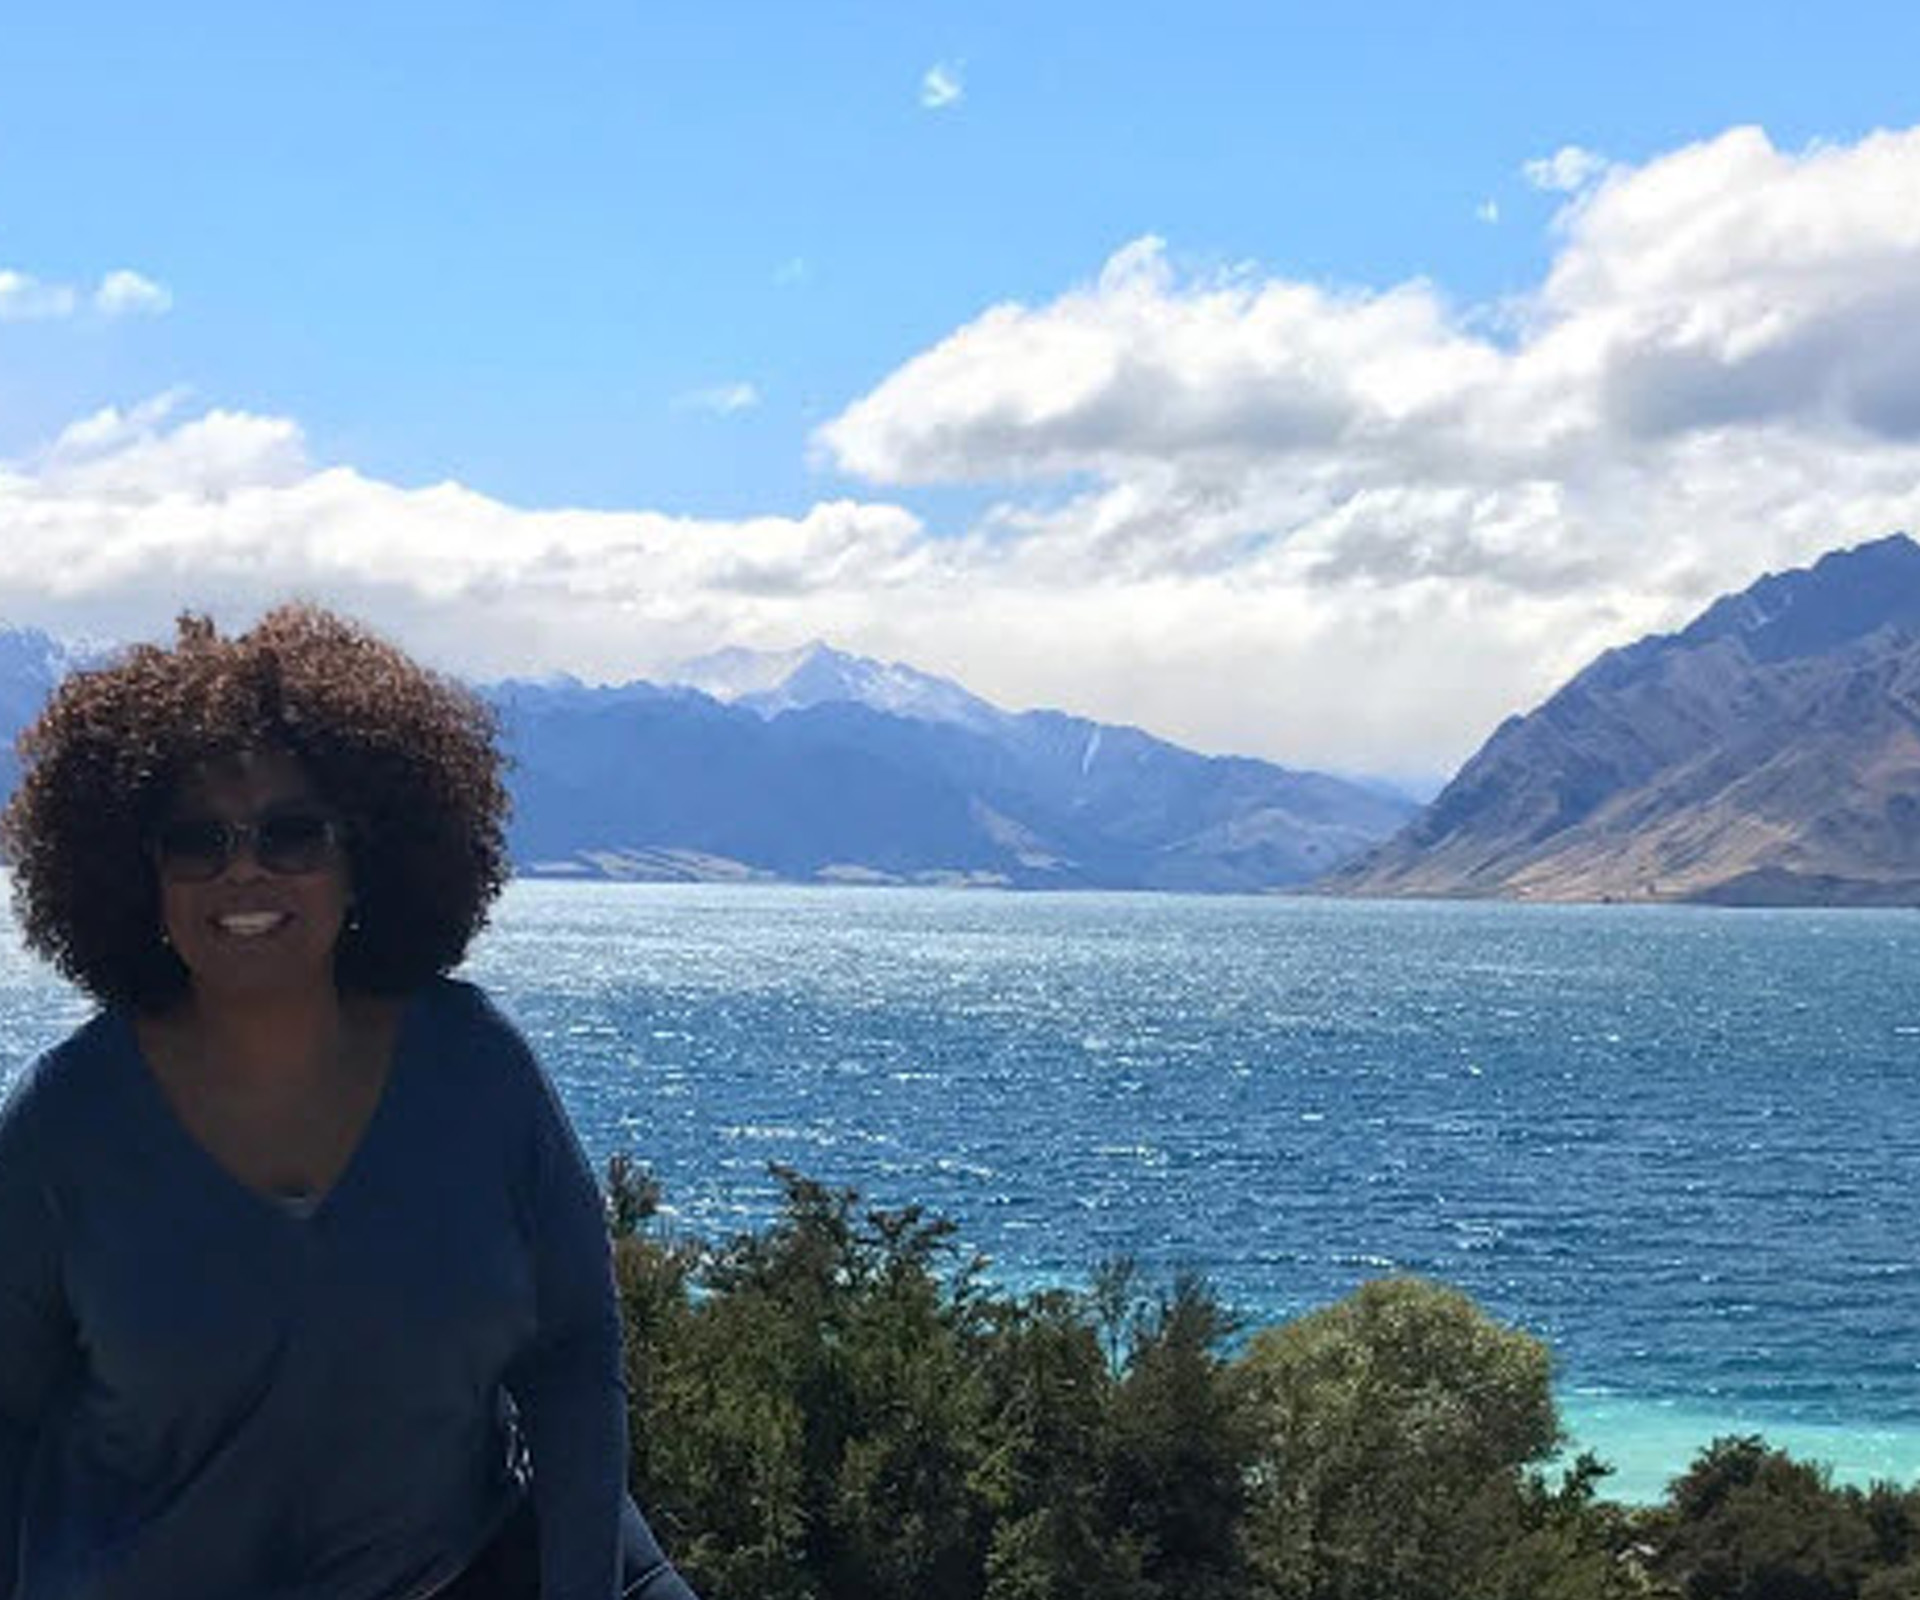 Oprah Winfrey shares picture of New Zealand to Instagram followers